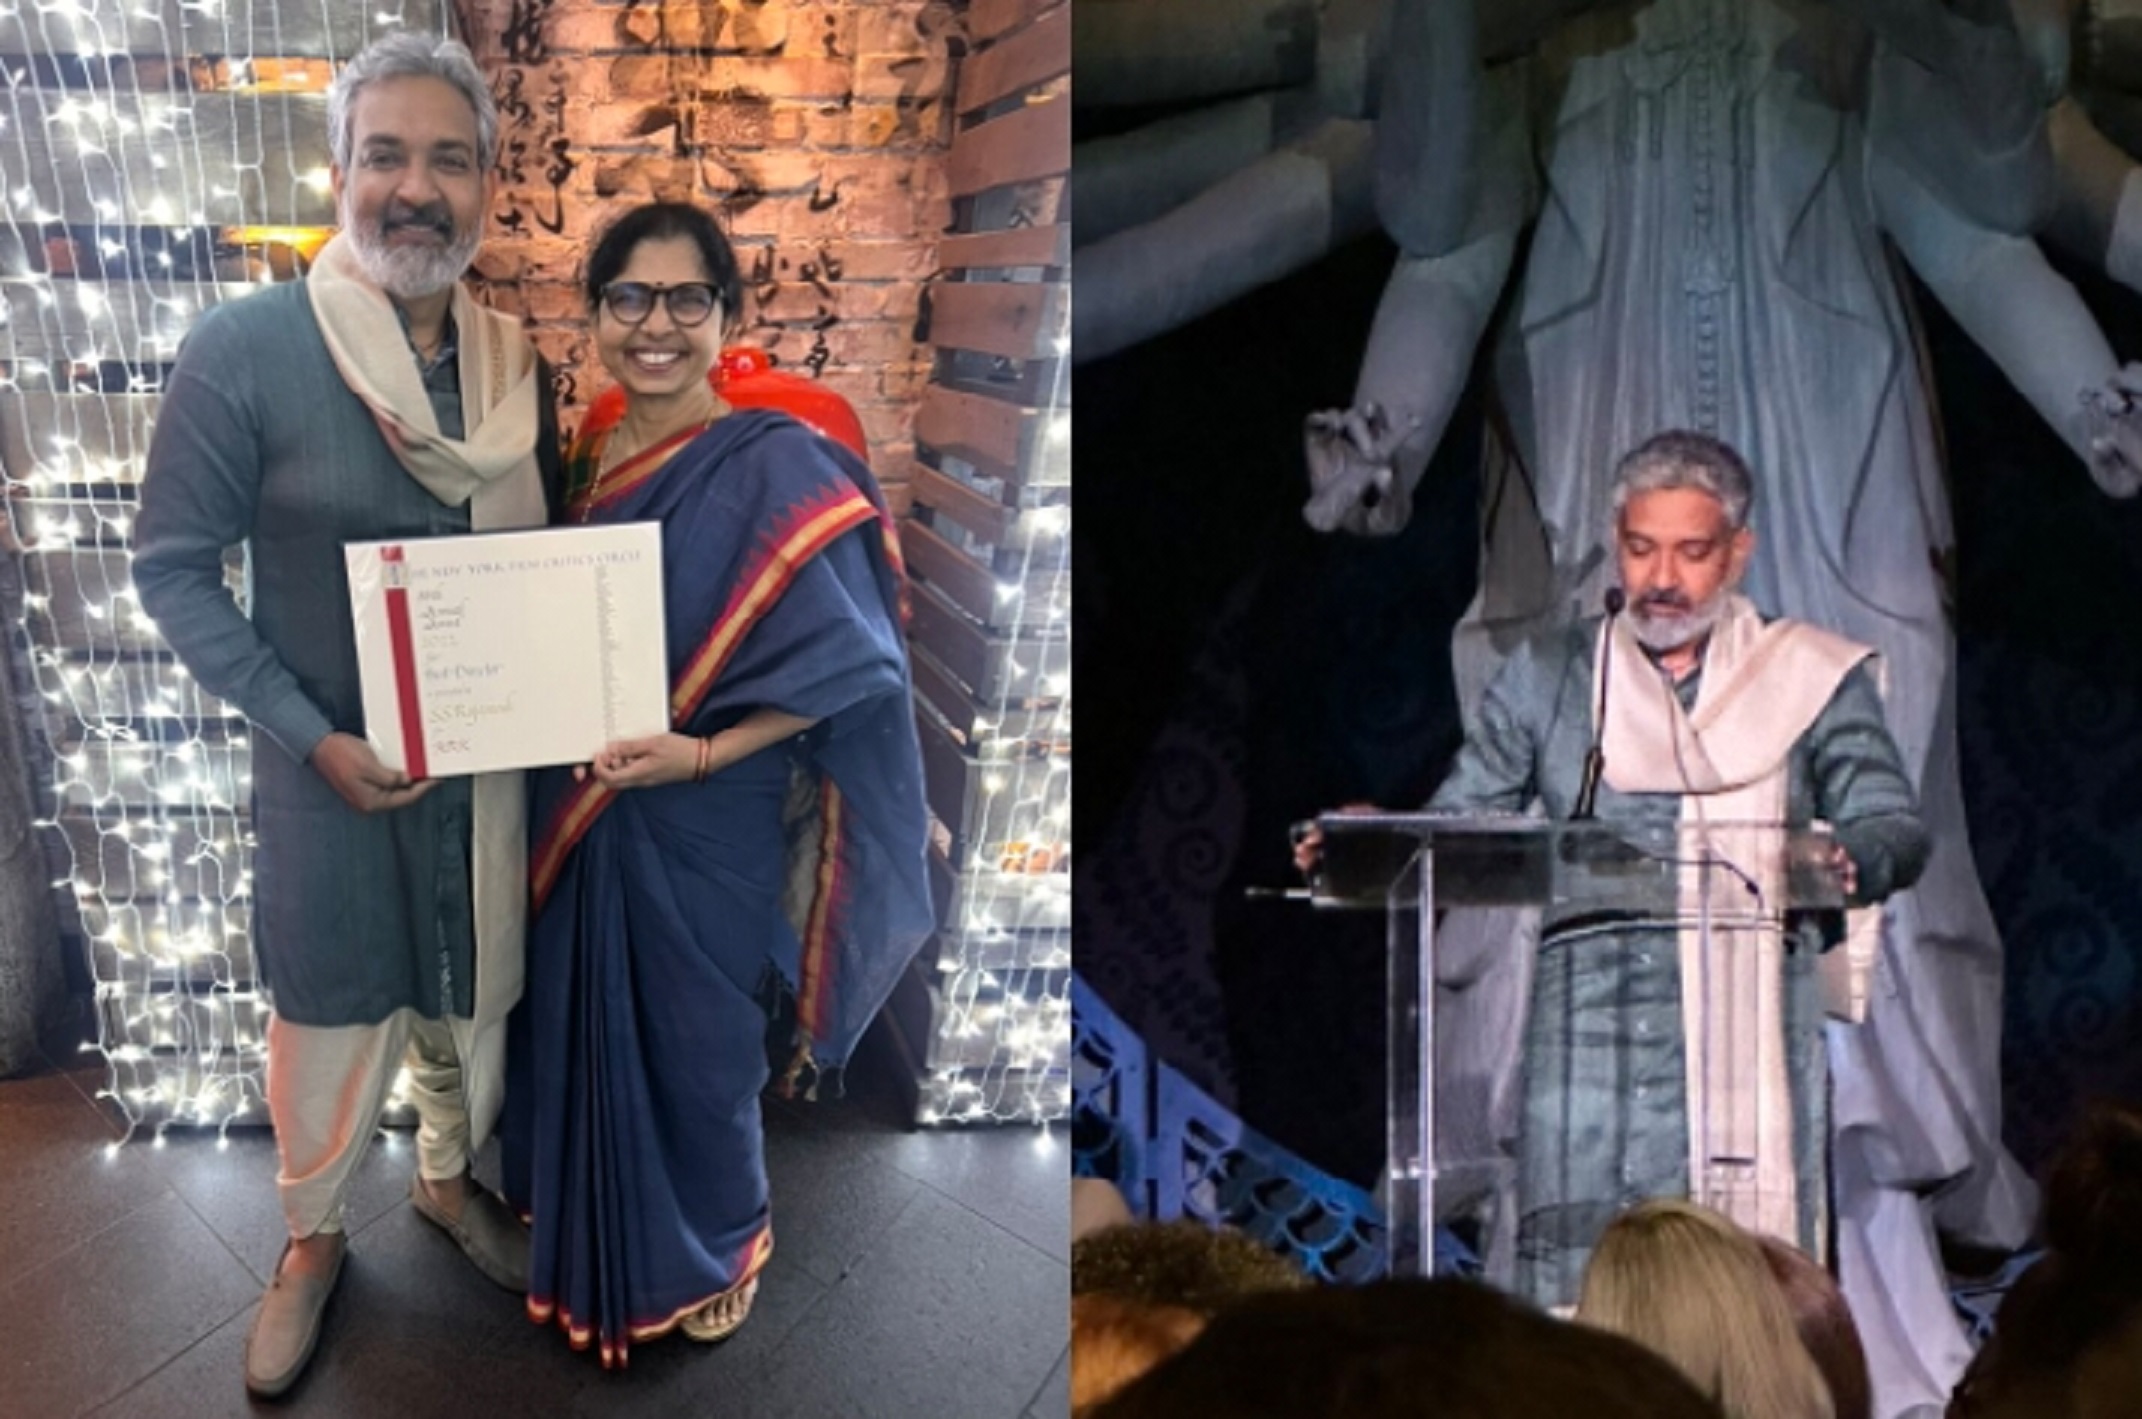 Watch : SS Rajamouli’s speech at NYFCC wins hearts, gets standing ovation from the audience